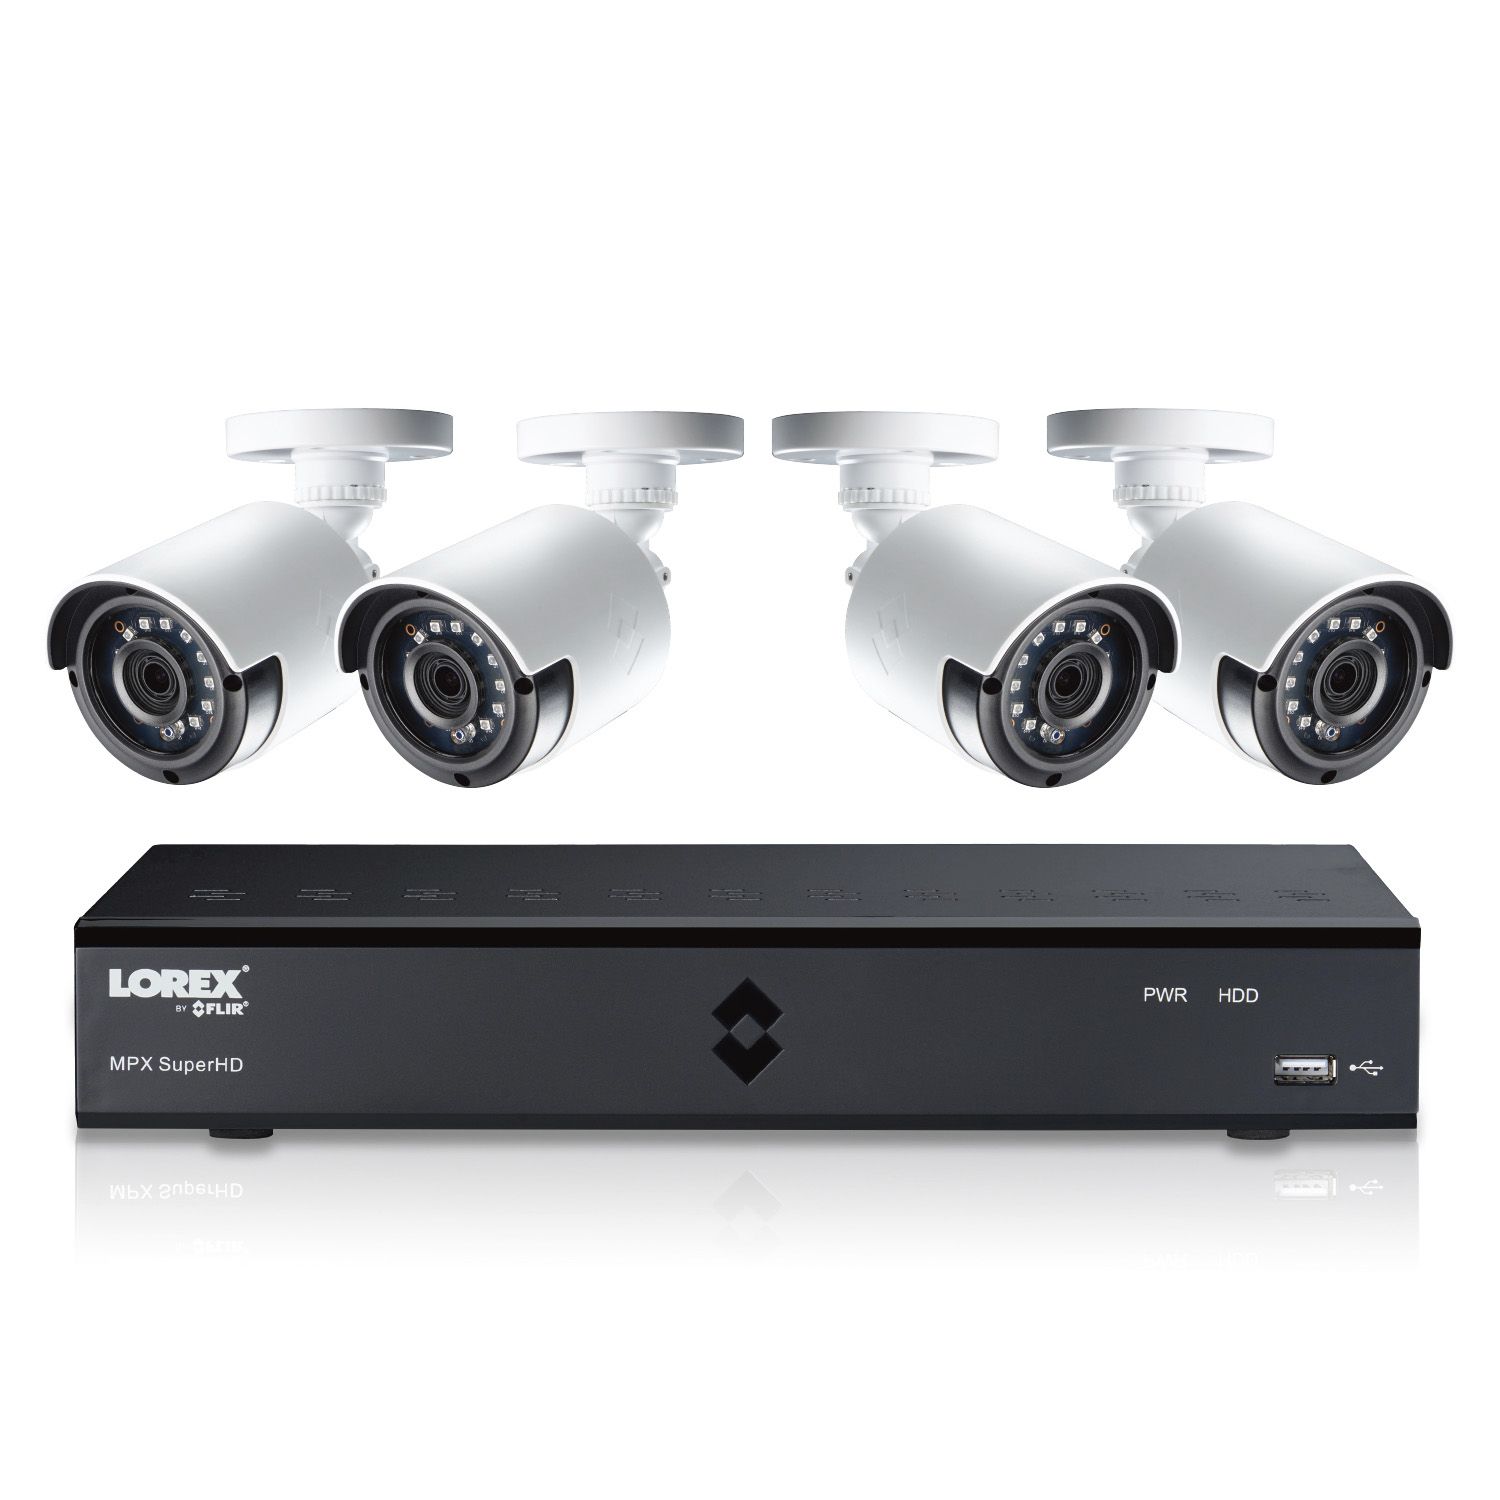 Lorex 4-Channel 4MP Super HD Security System with CNV, 1TB DVR, 4 Camera